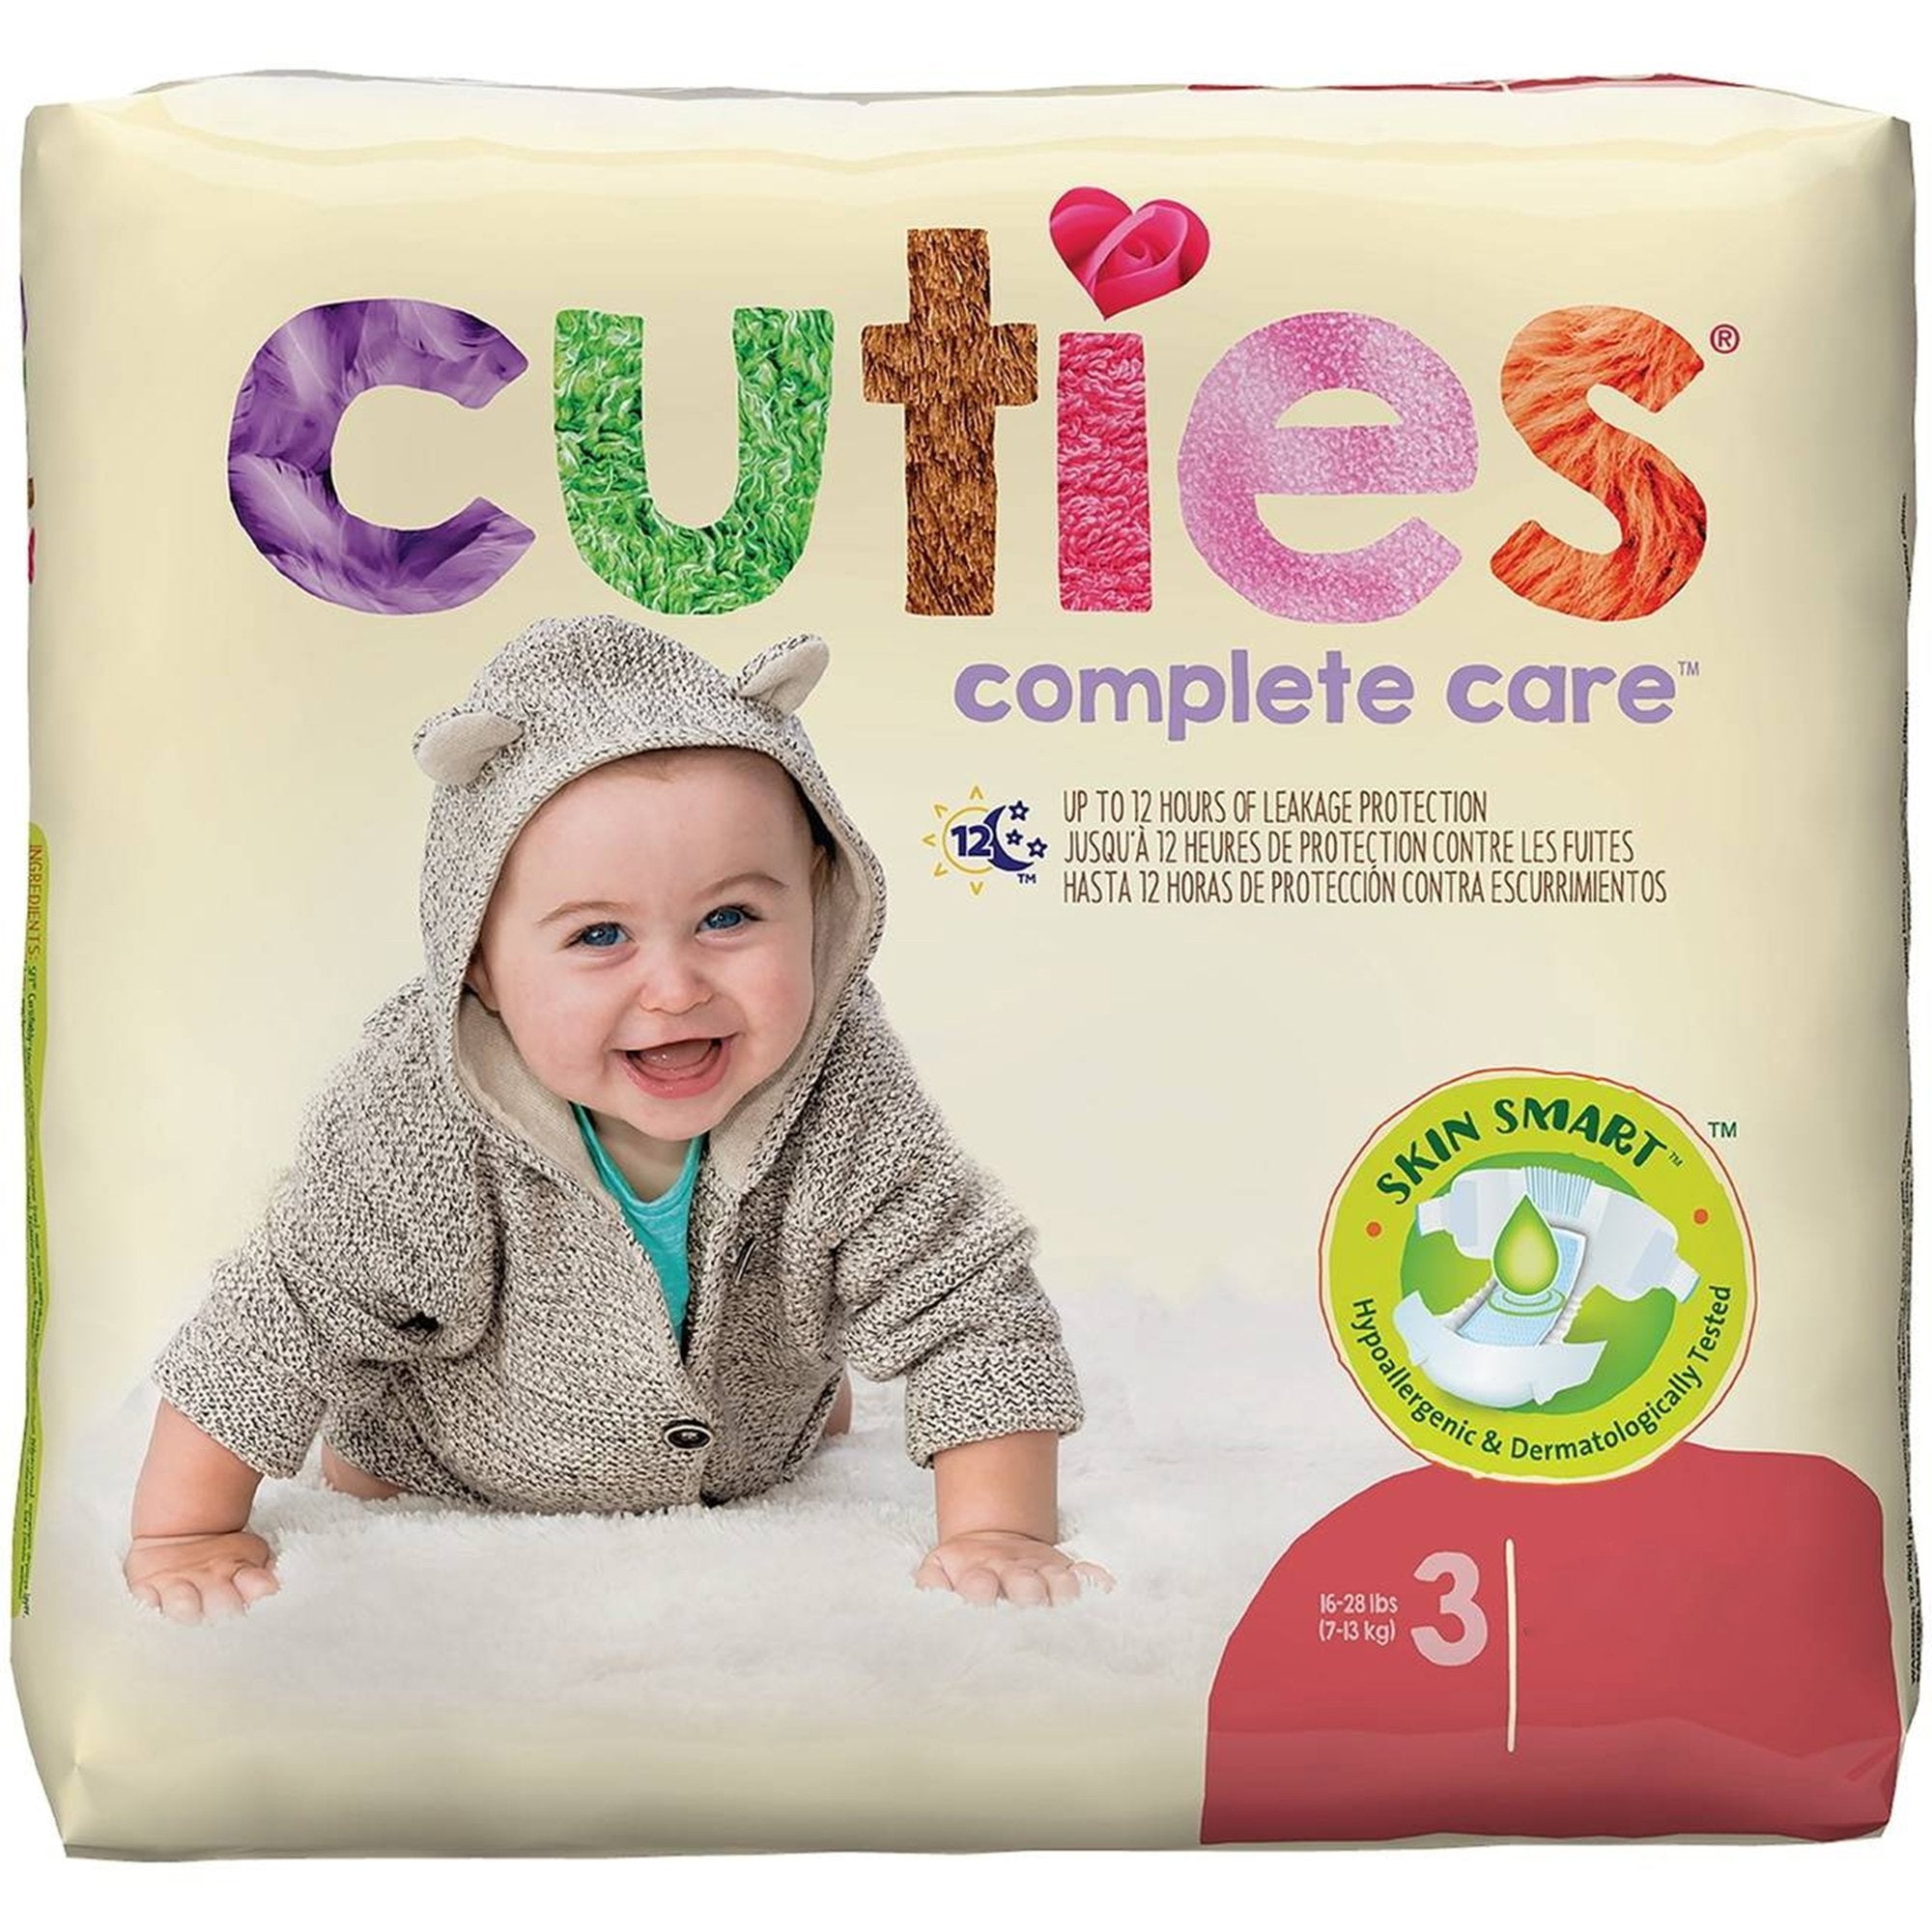 Cuties Complete Care Diapers, Size 3